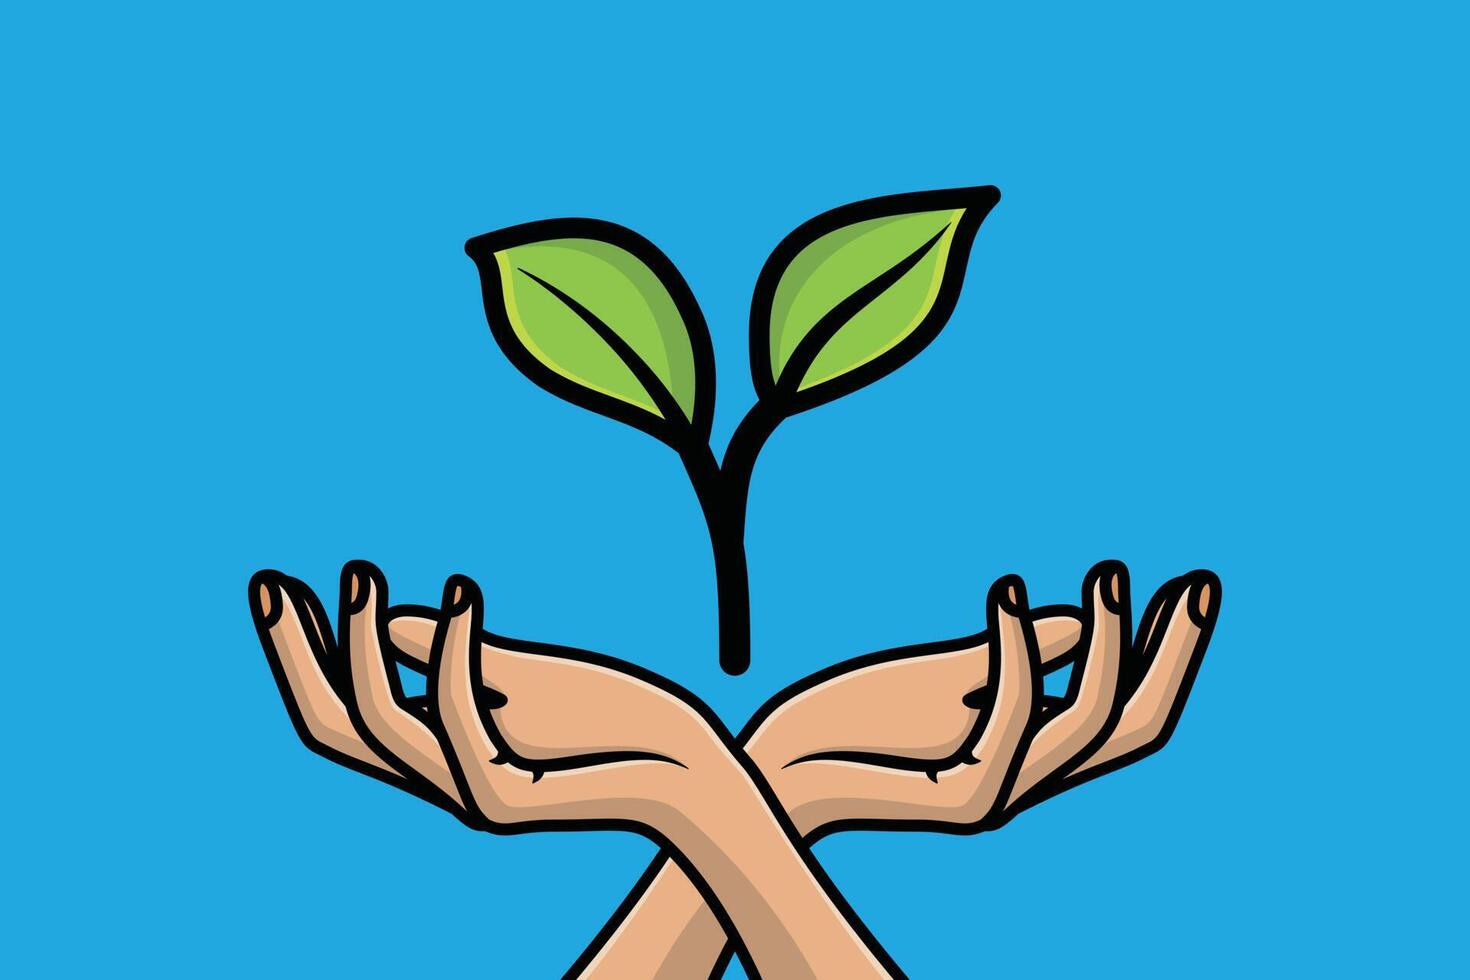 People Hand with Plant vector illustration. People nature icon concept. Growth concept. Environment friendly symbol.